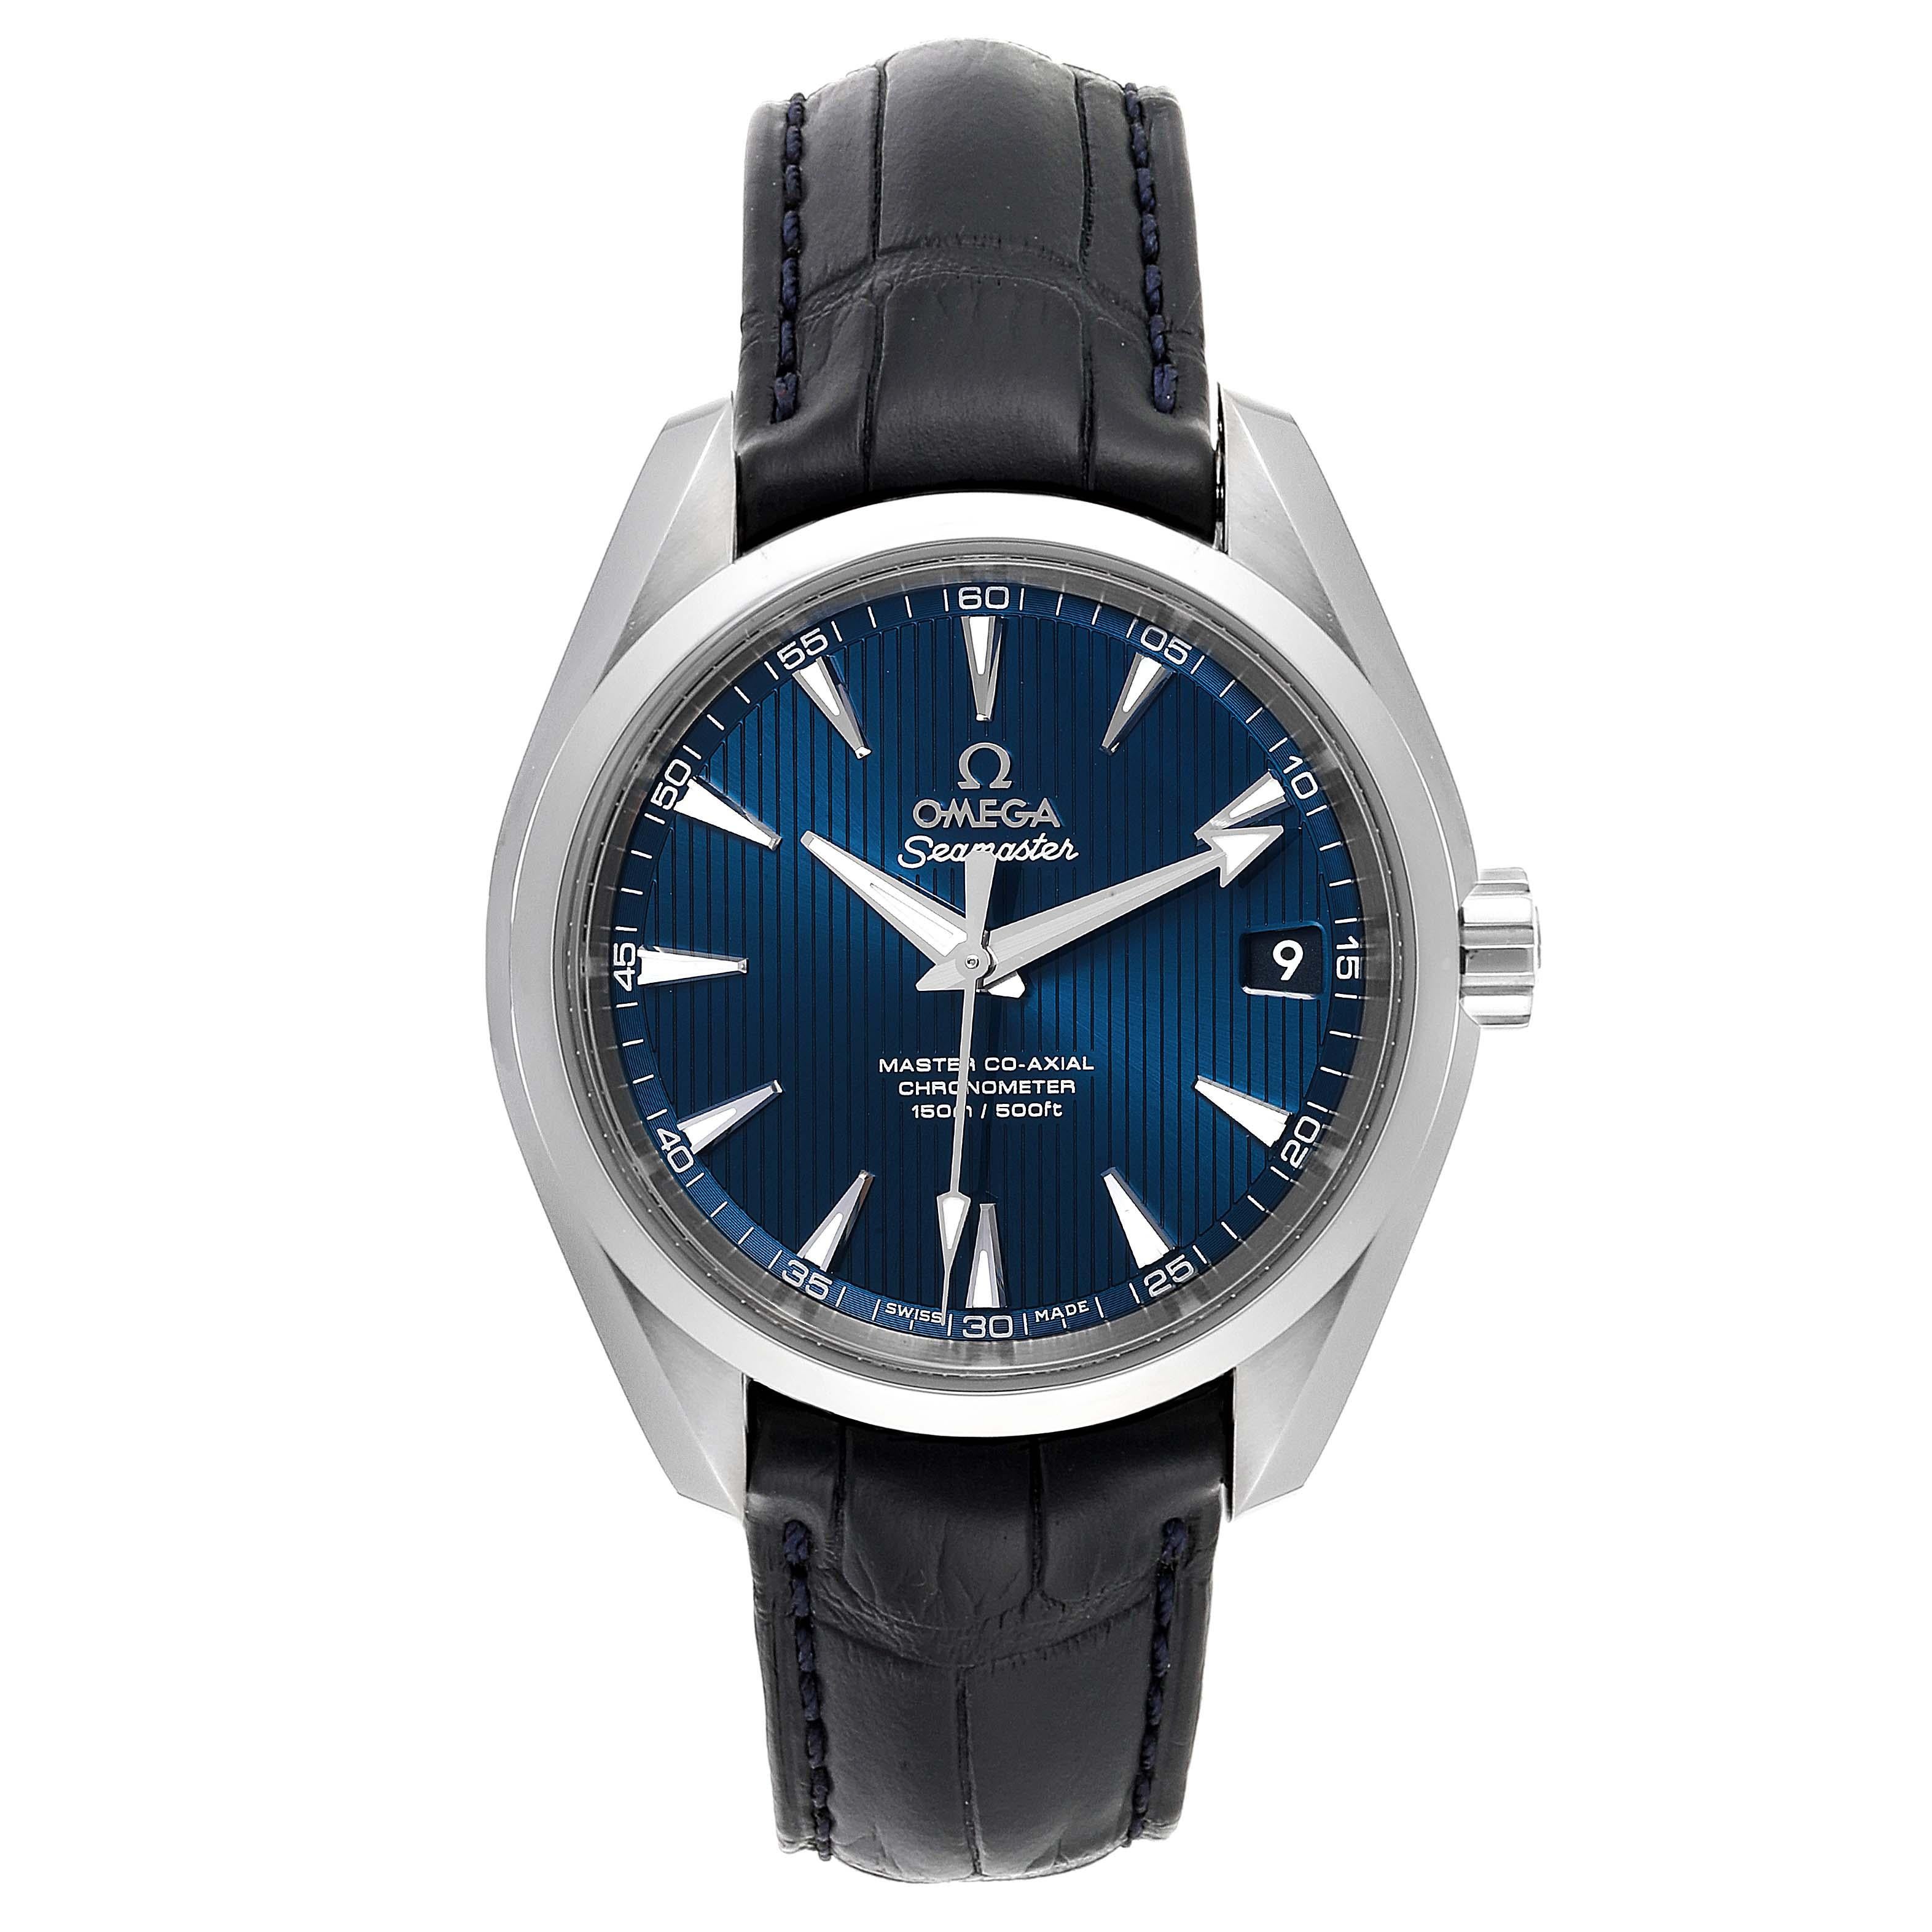 Omega Seamaster Aqua Terra Blue Dial Watch 231.13.39.21.03.001 Box Card. Automatic self-winding movement. Stainless steel round case 38.5 mm in diameter. Transparent exhibition sapphire crystal case back. Stainless steel bezel. Scratch resistant